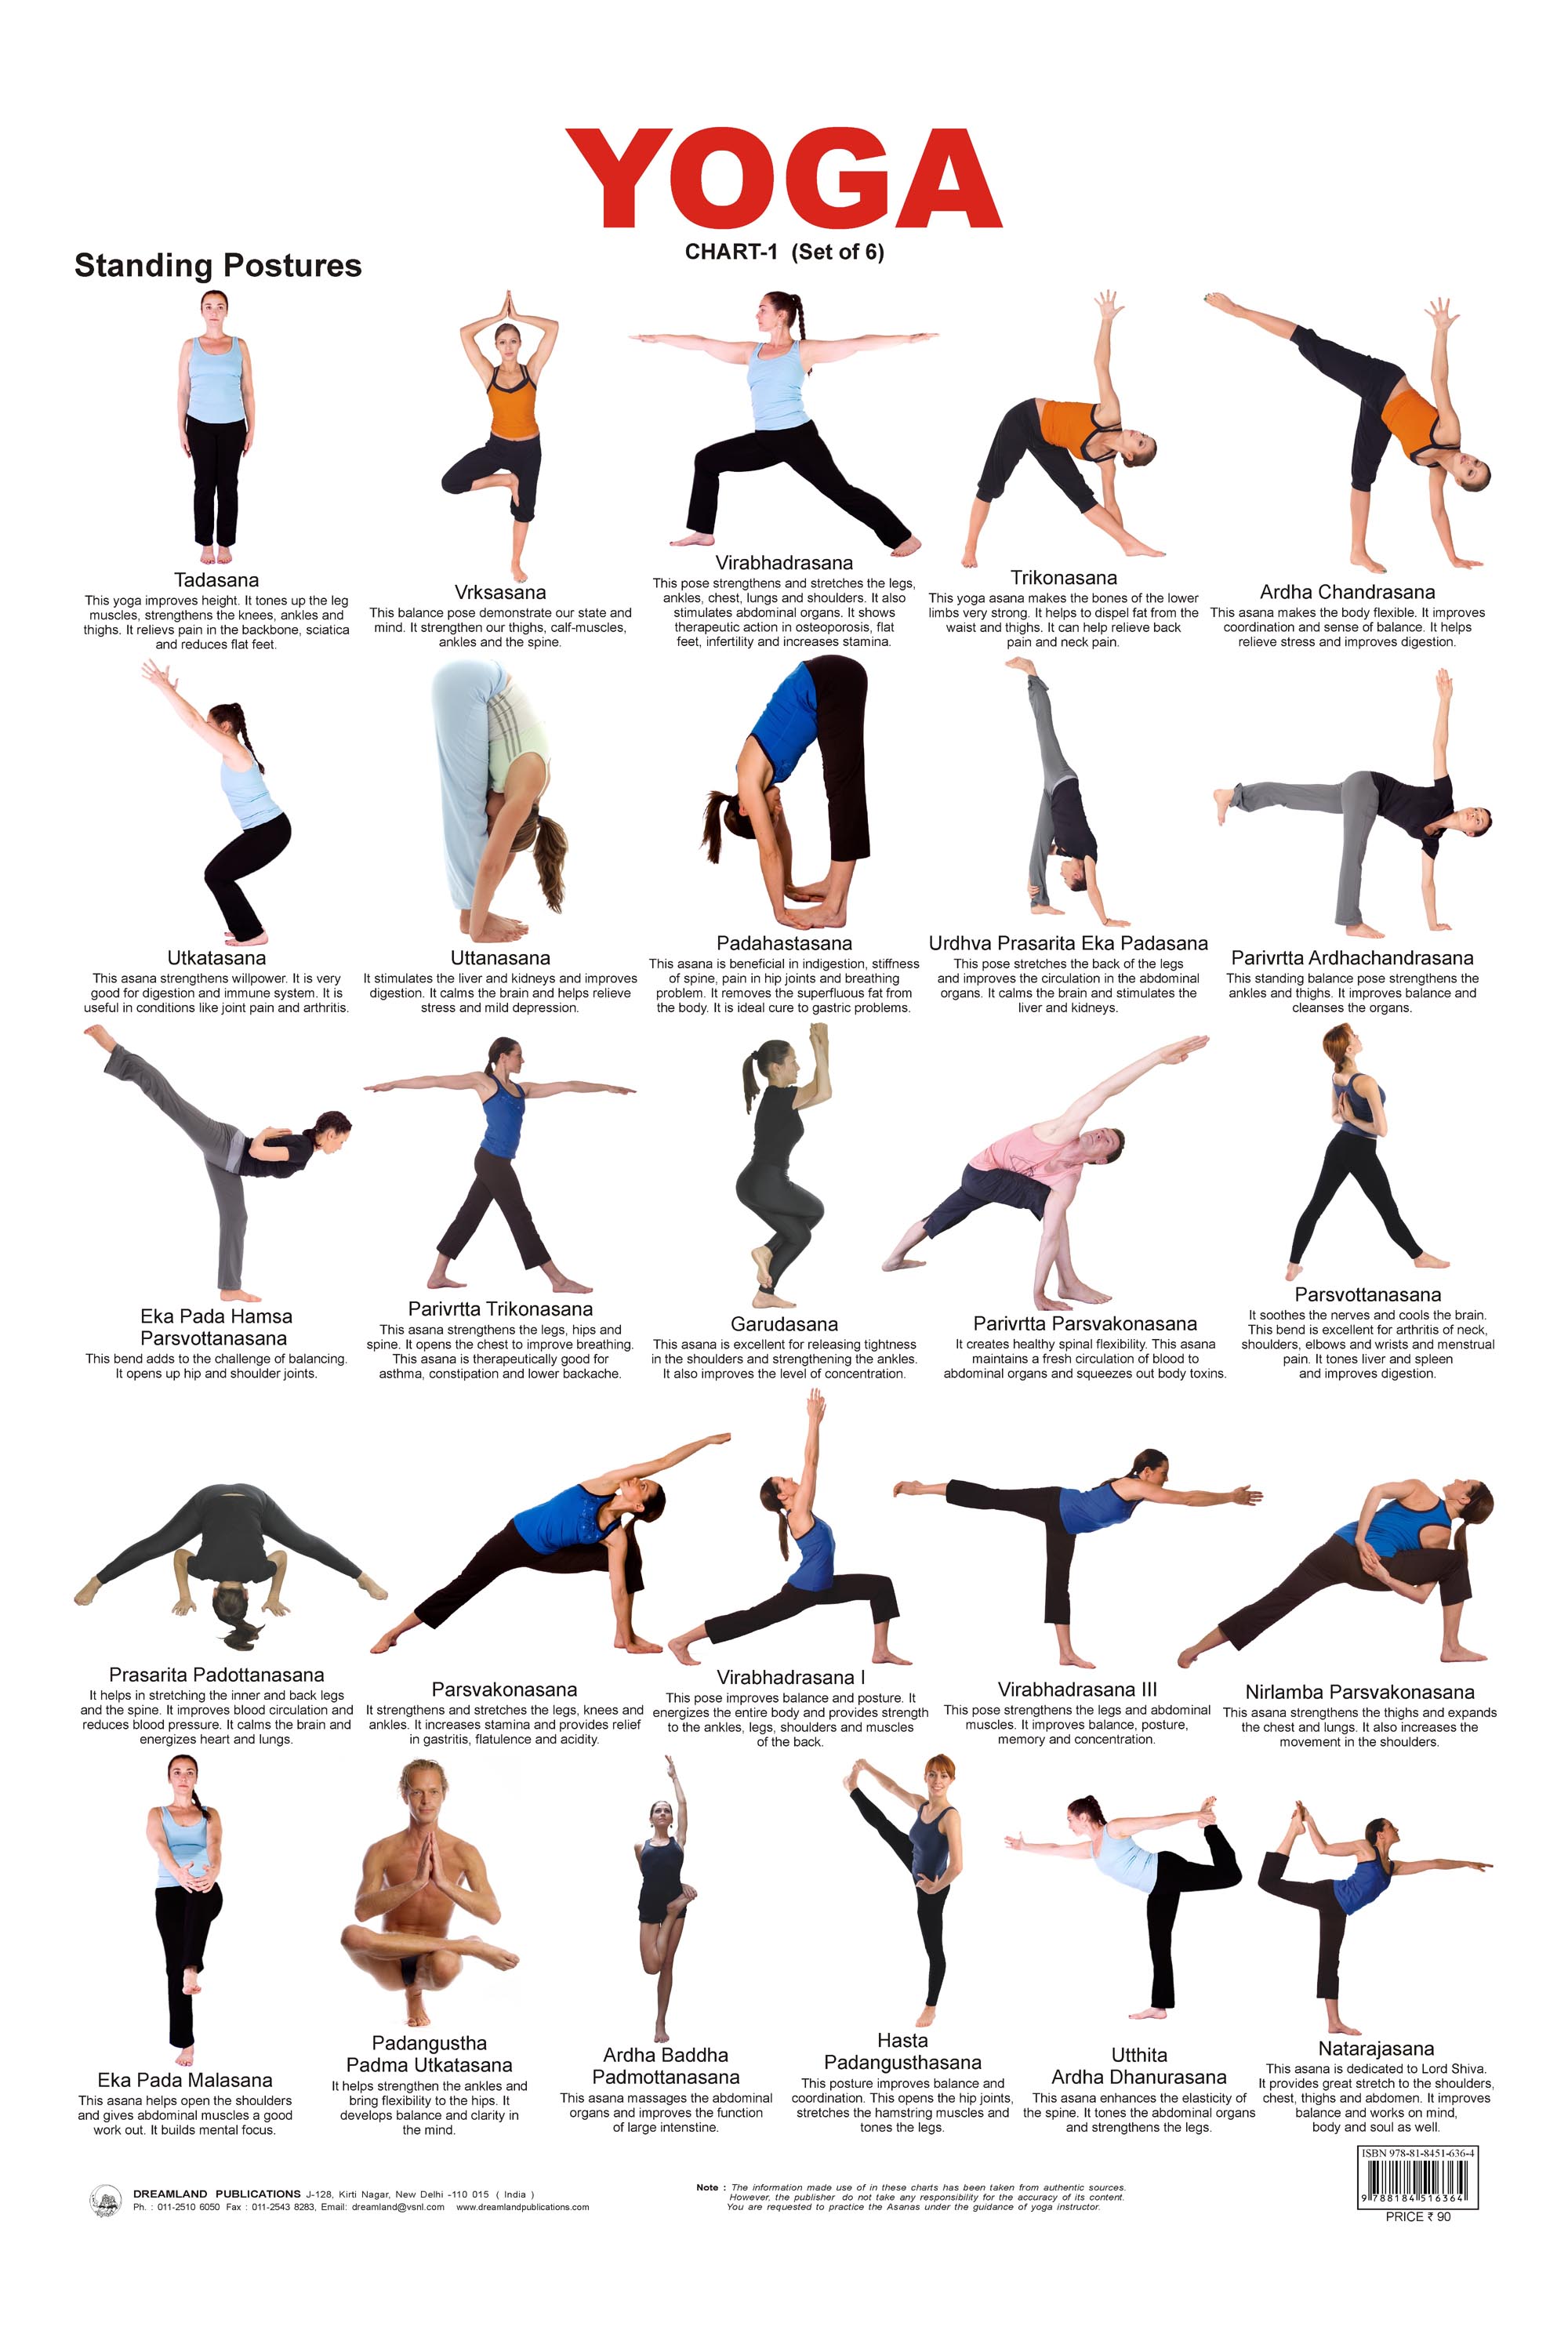 hundred pictures and many Yoga yoga a of There over different   are schools Yoga.  poses poses